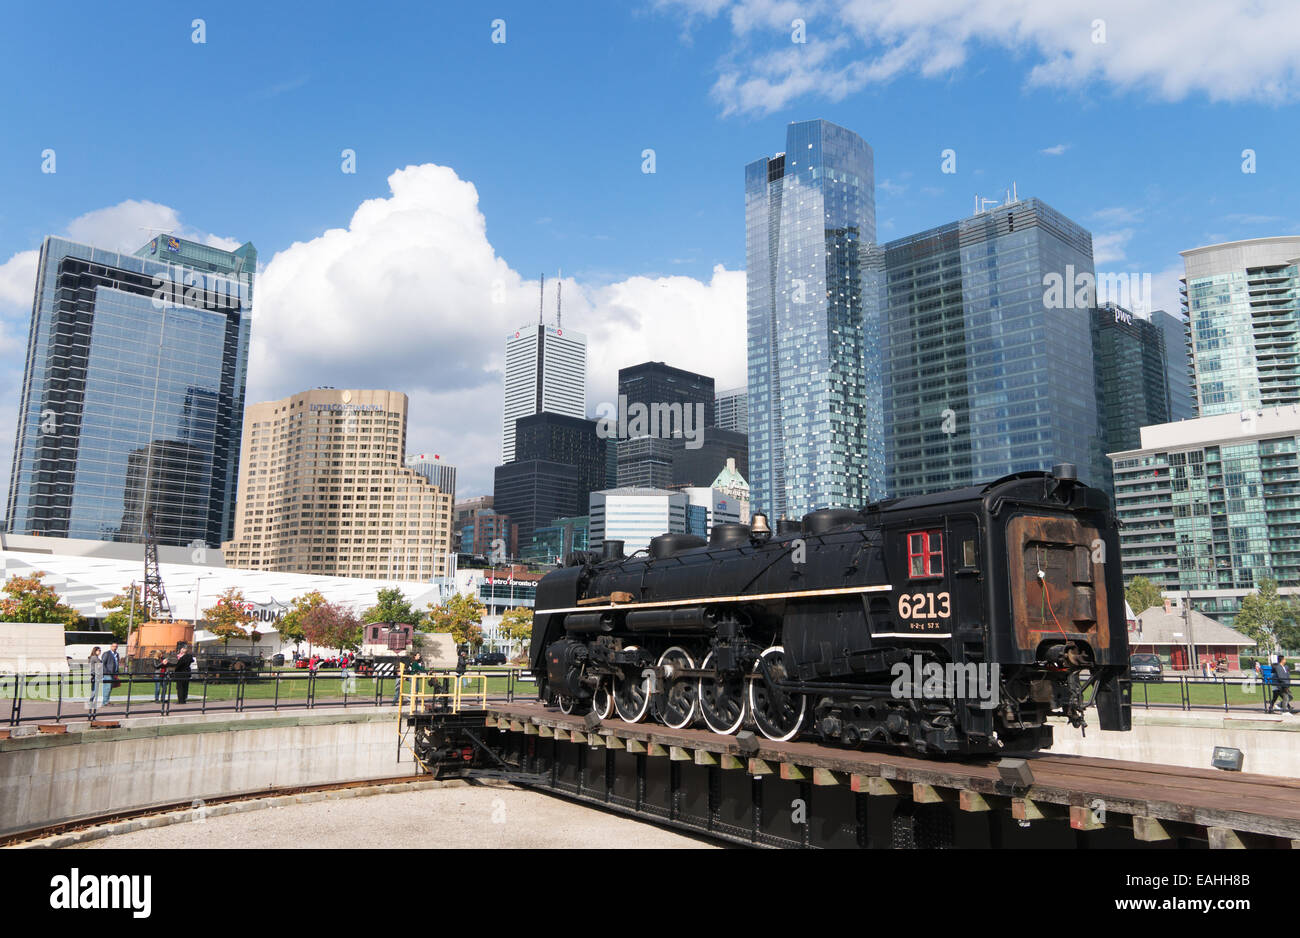 Steam train 6213 on turntable at John Street Roundhouse  with modern buildings in background Toronto, Ontario, Canada Stock Photo